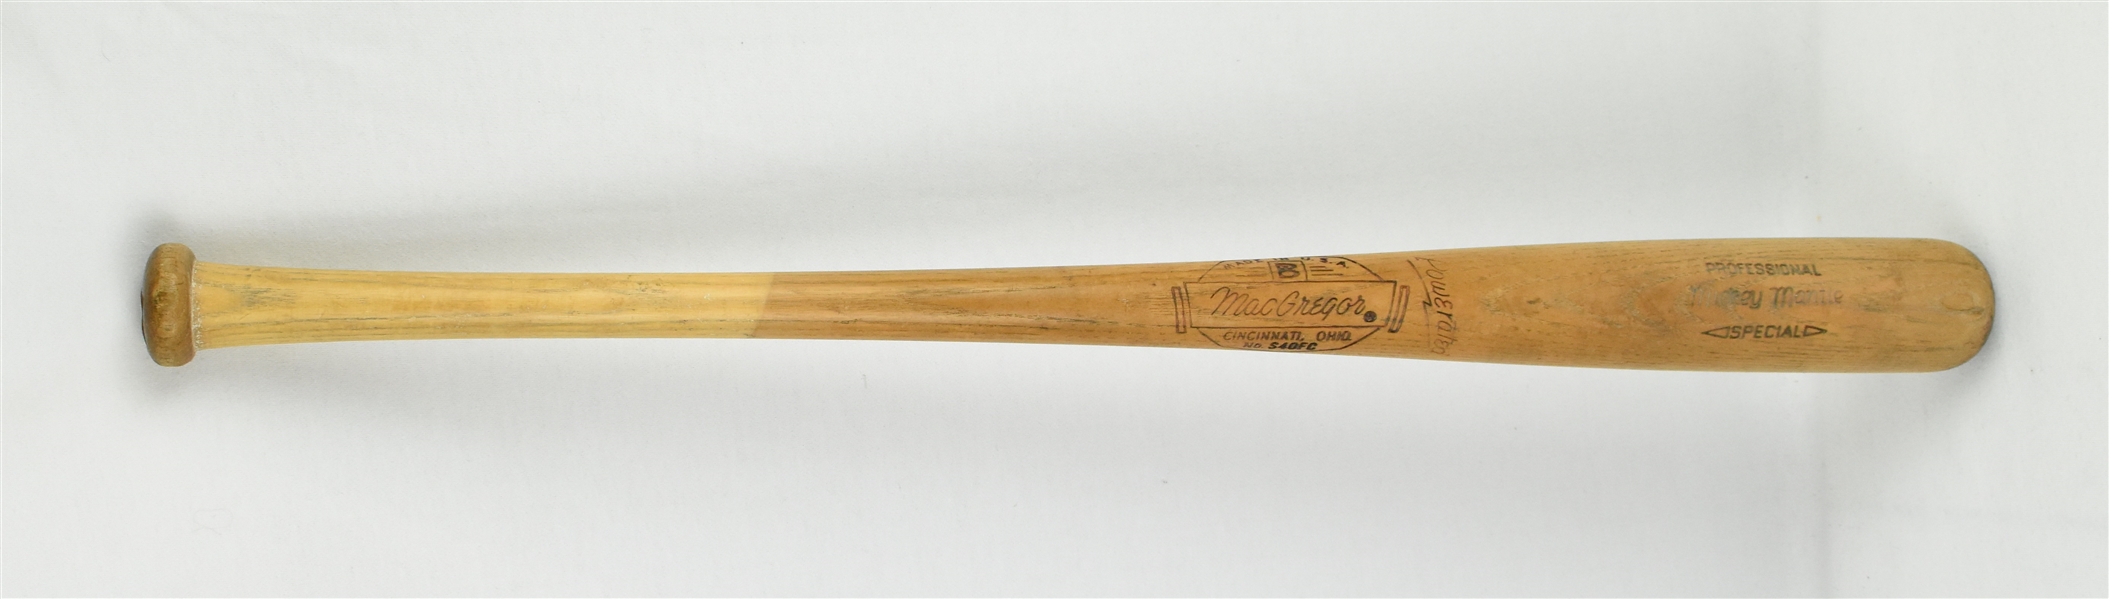 Mickey Mantle 1965-66 Professional Special Bat